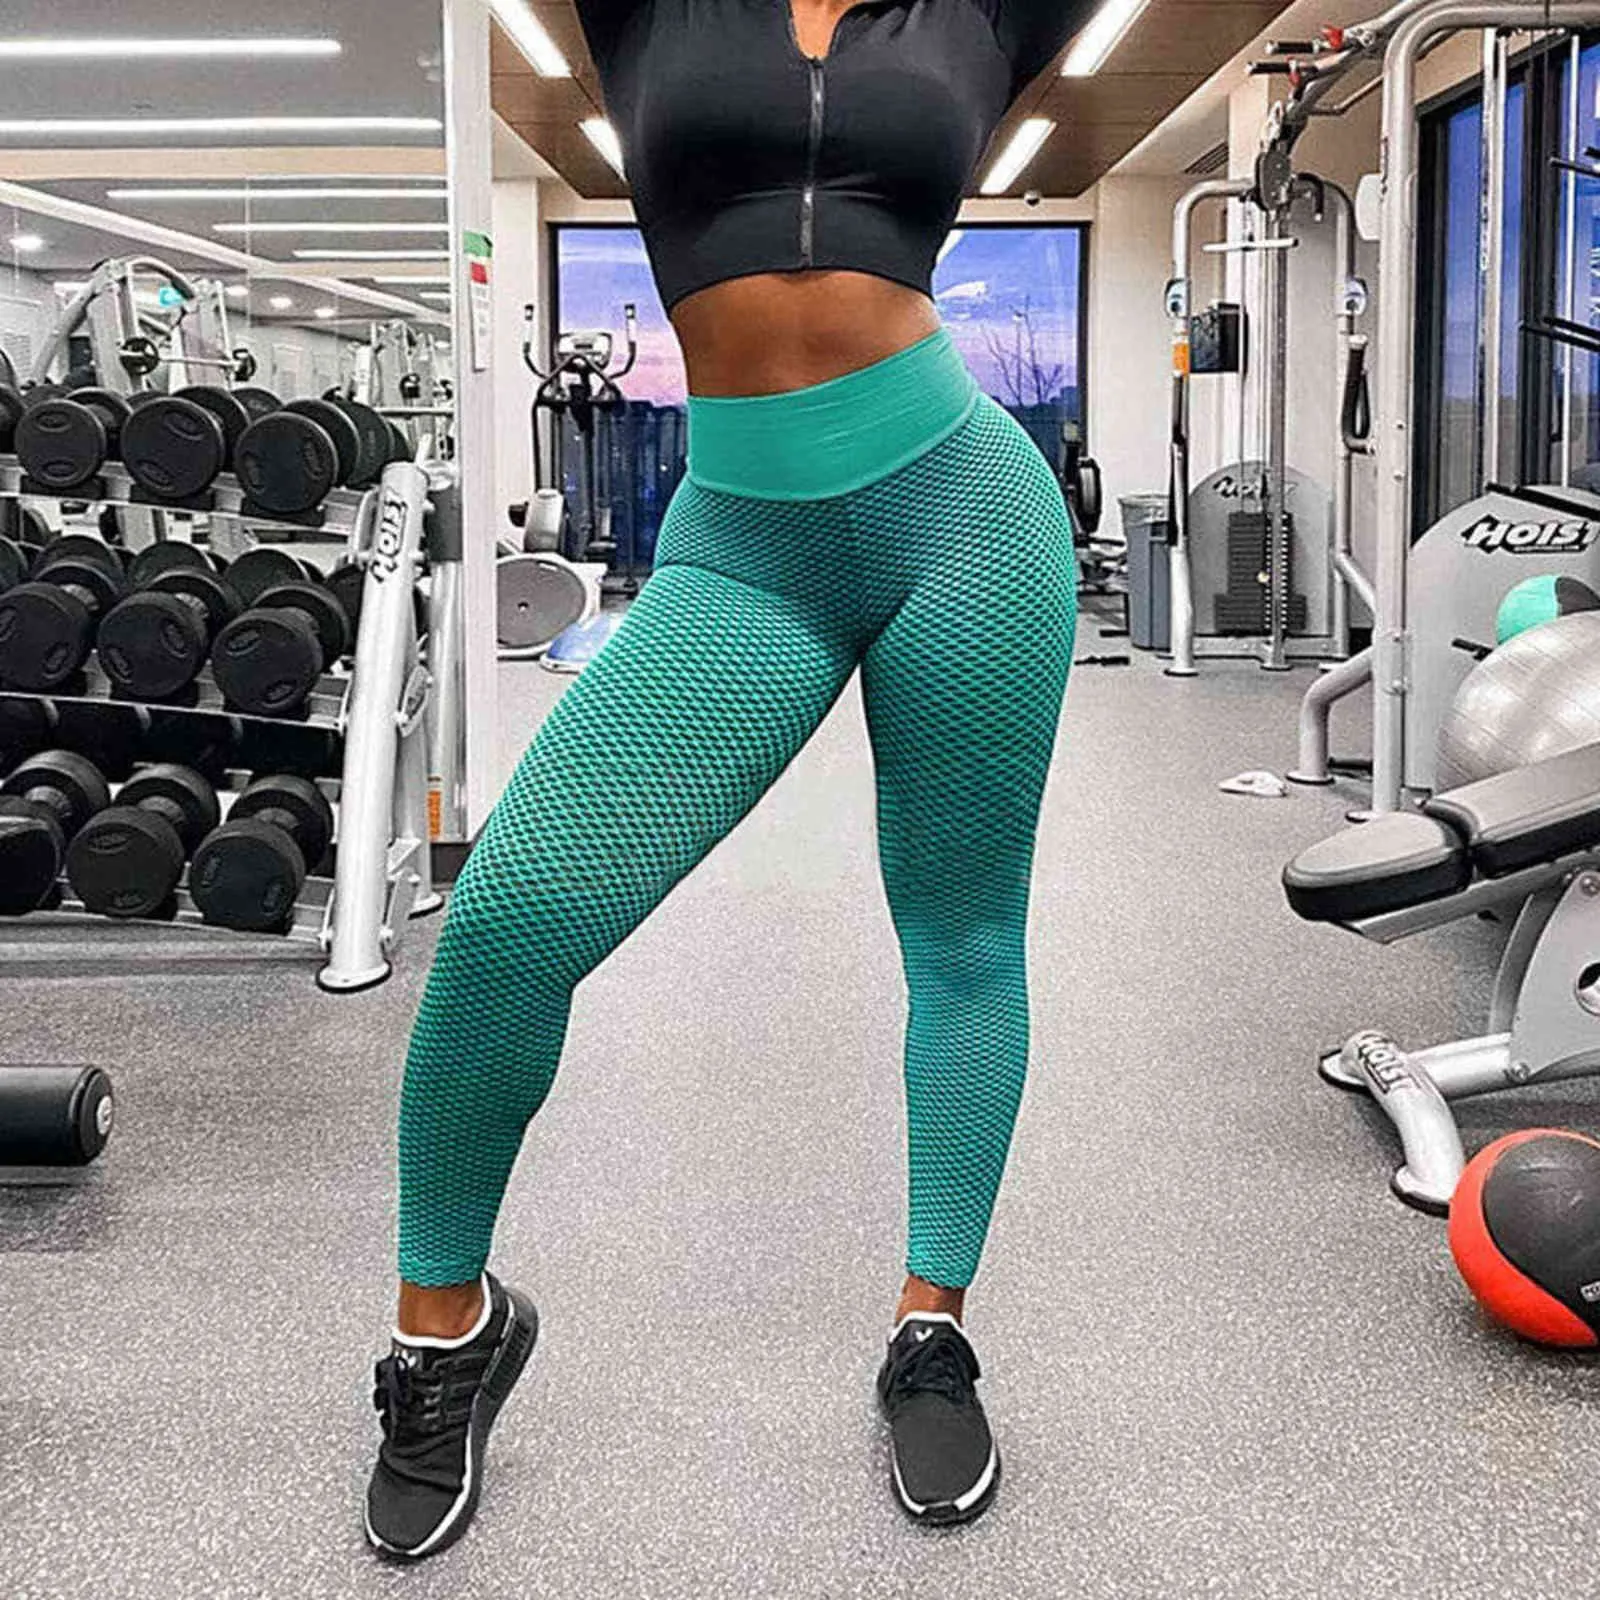 Womens Textured Scrunch Butt Seamless Workout Leggings Sexy Push Up Fitness  Sport Pants For Gym And Workouts 211130 From Lu003, $24.86